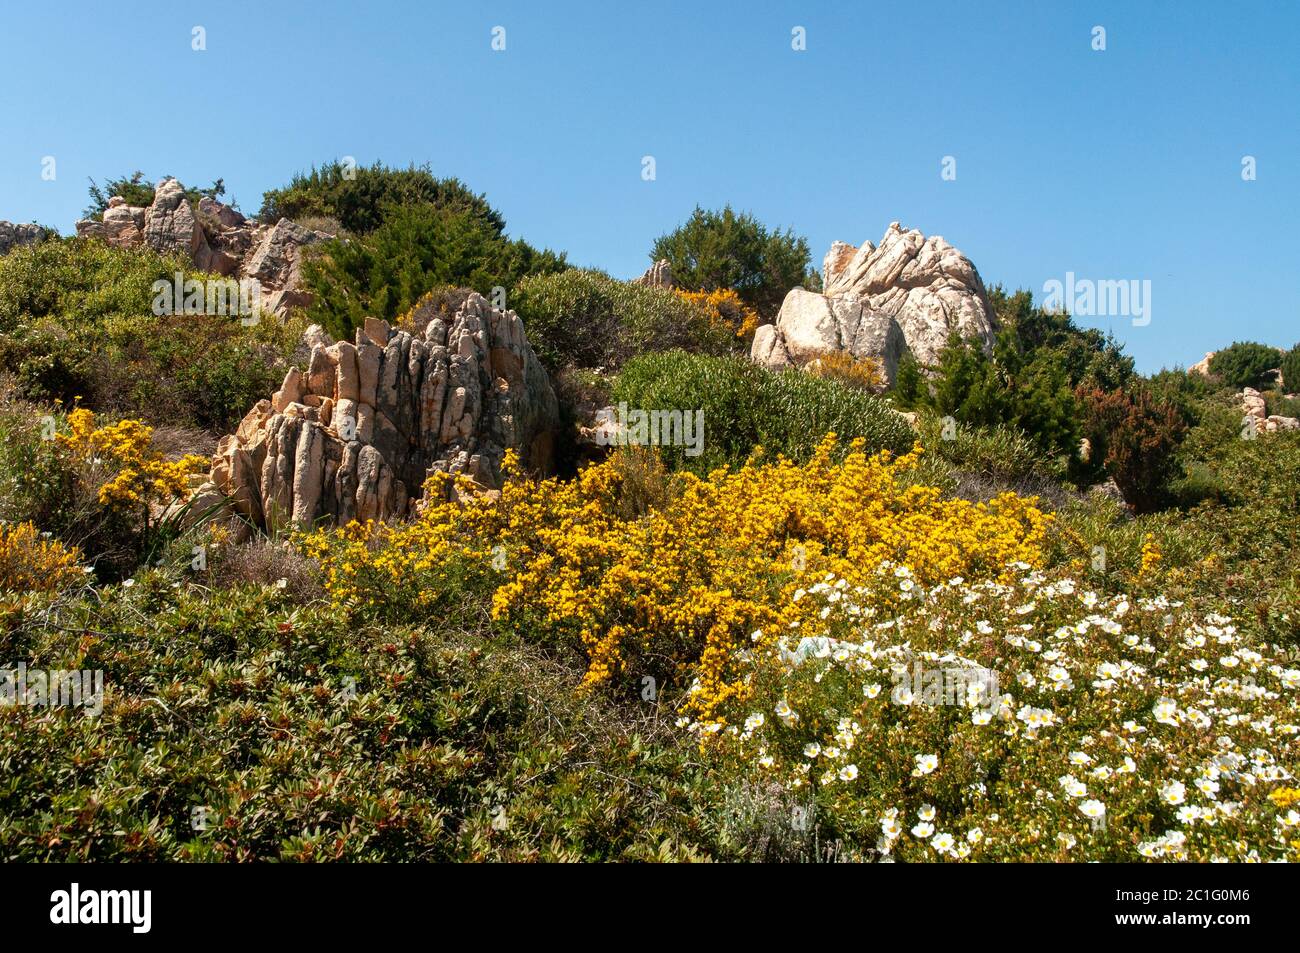 Beautiful Mediterranean yellow bush of flowers of French Broom (Genista monspessulana) with red rocky formation and blue sky Stock Photo